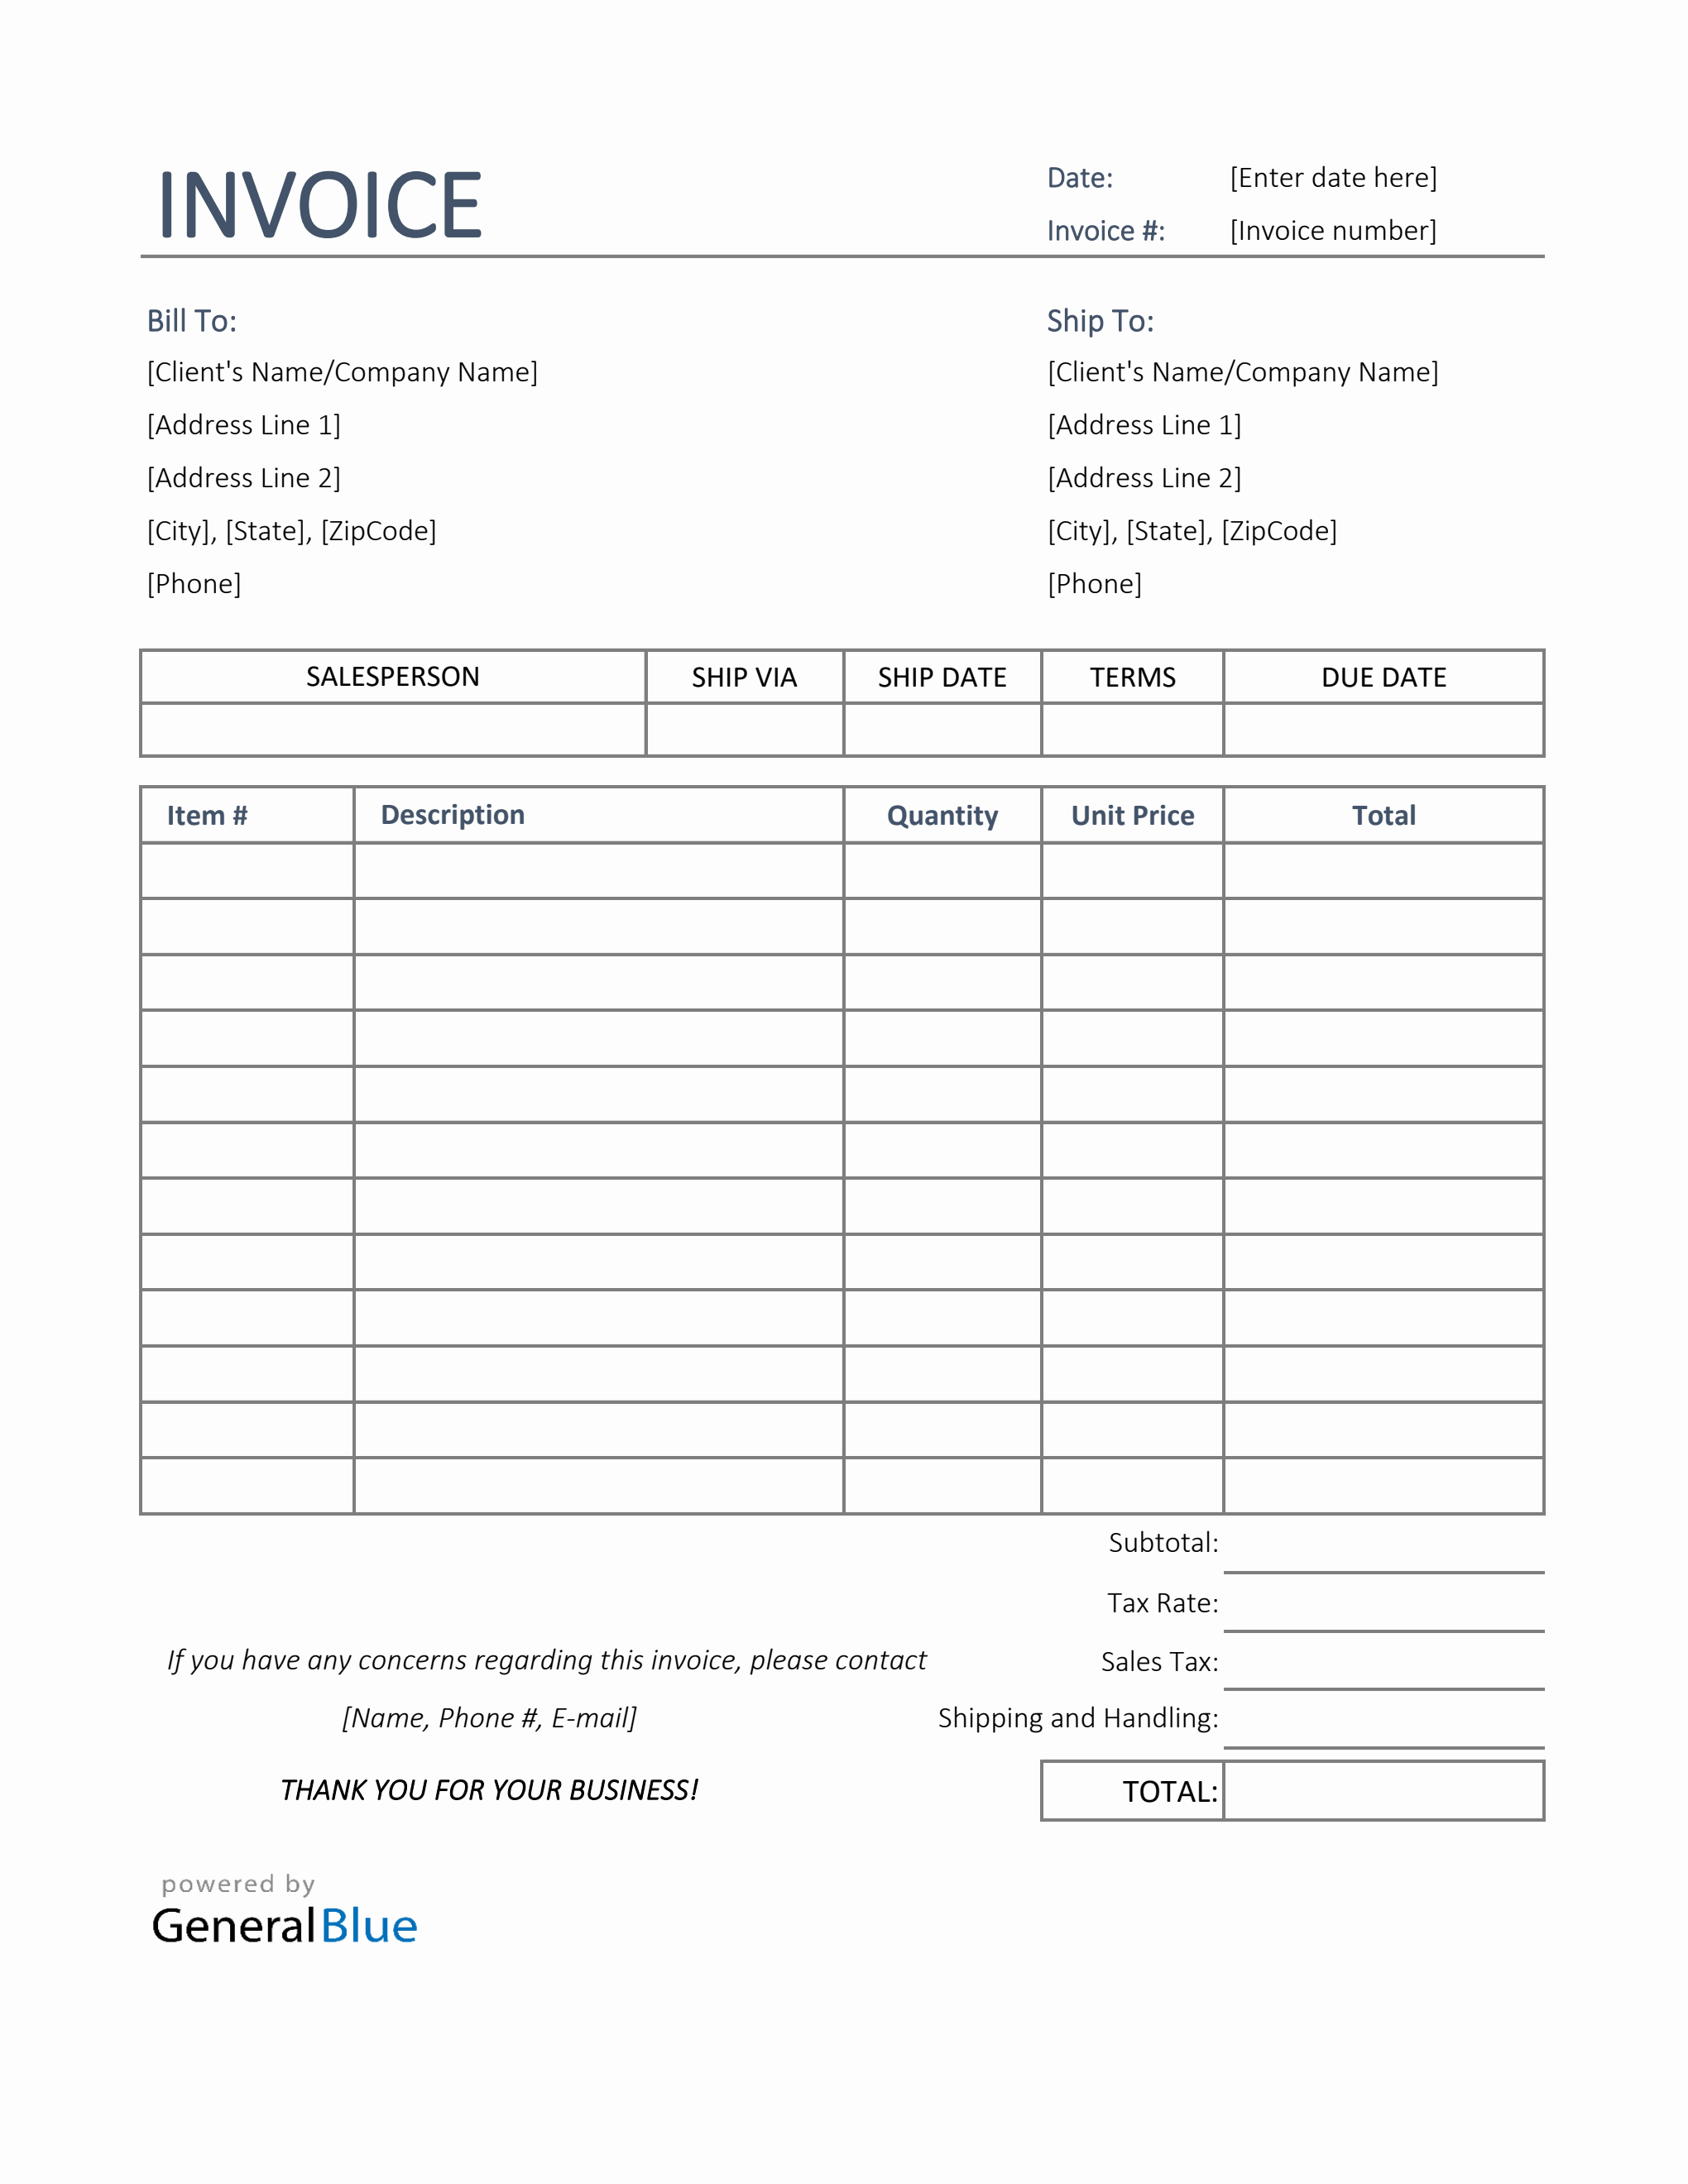 sales-invoice-template-in-excel-simple